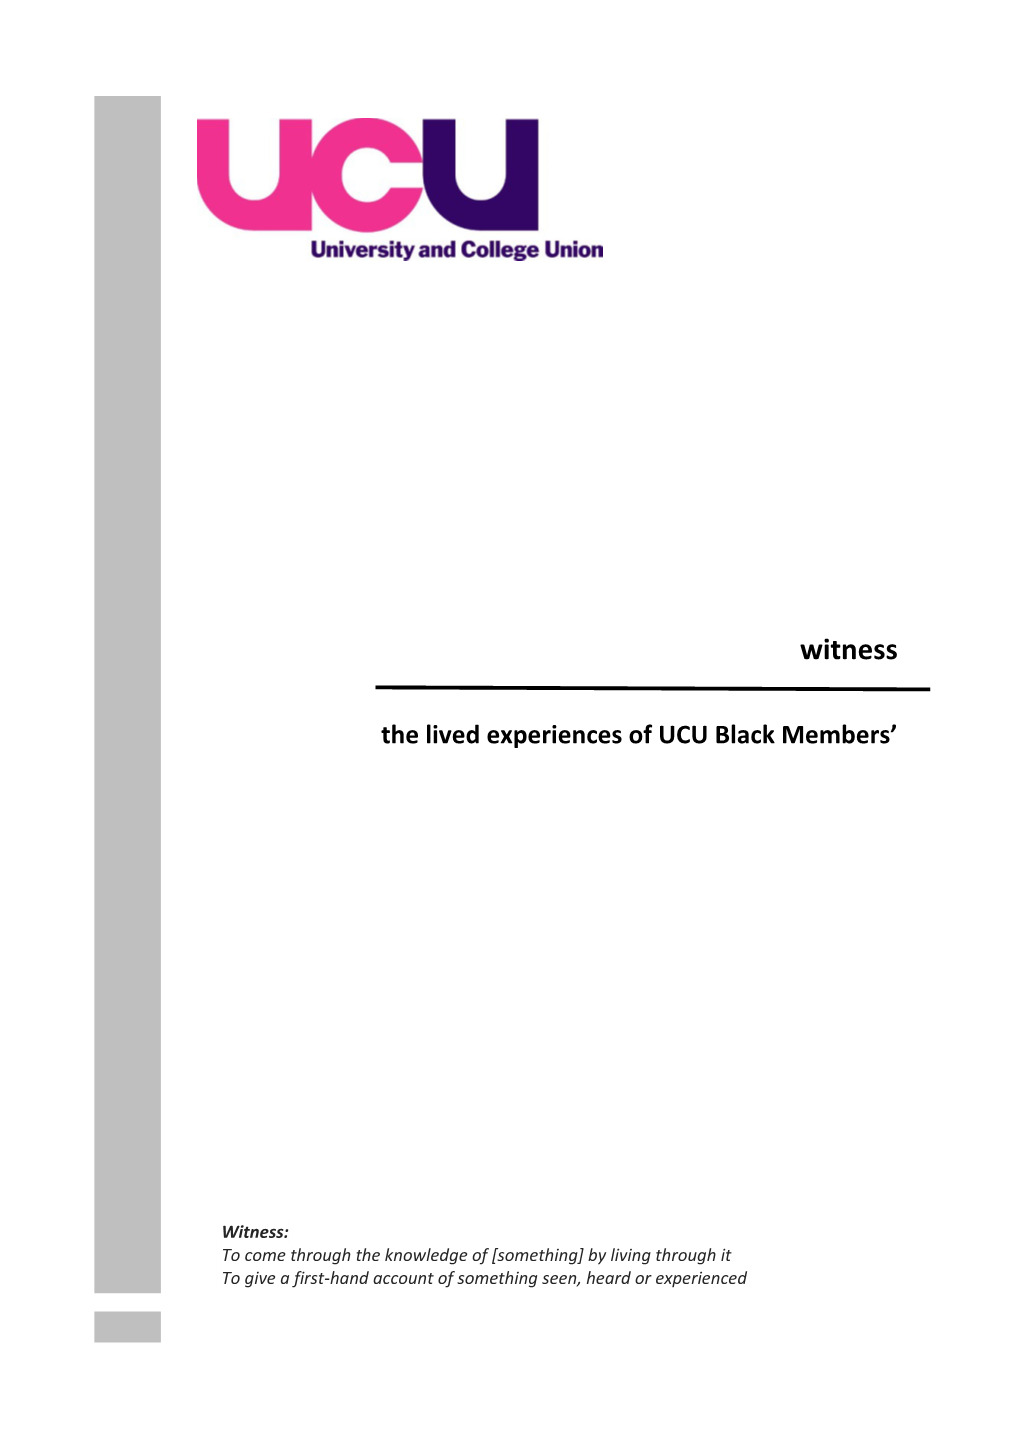 The Lived Experiences of UCU Black Members